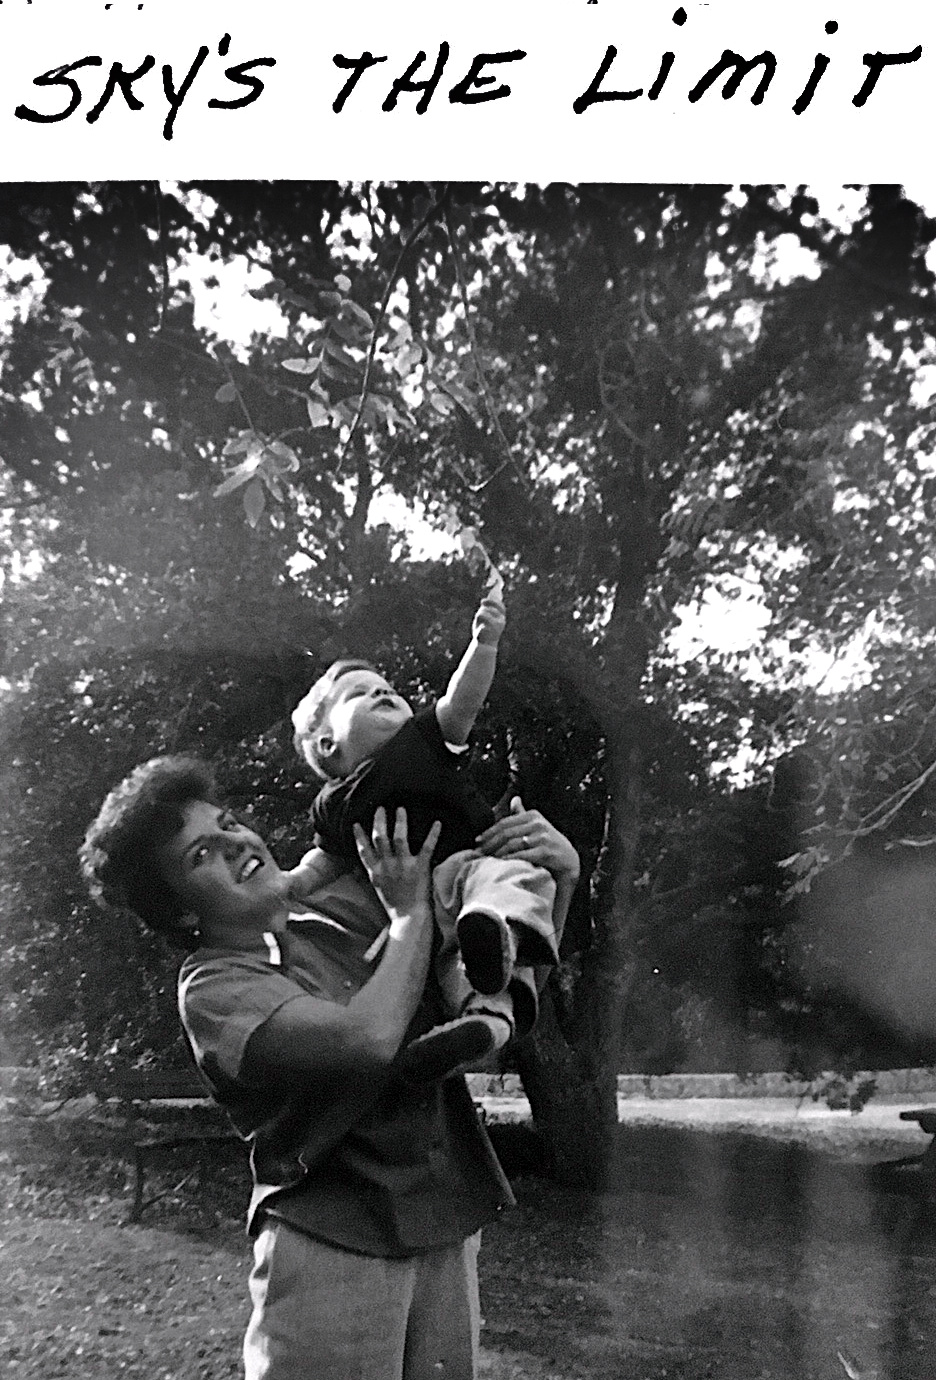 Woman holding up small boy as he reaches for a tree. Text above says "Sky's the limit."